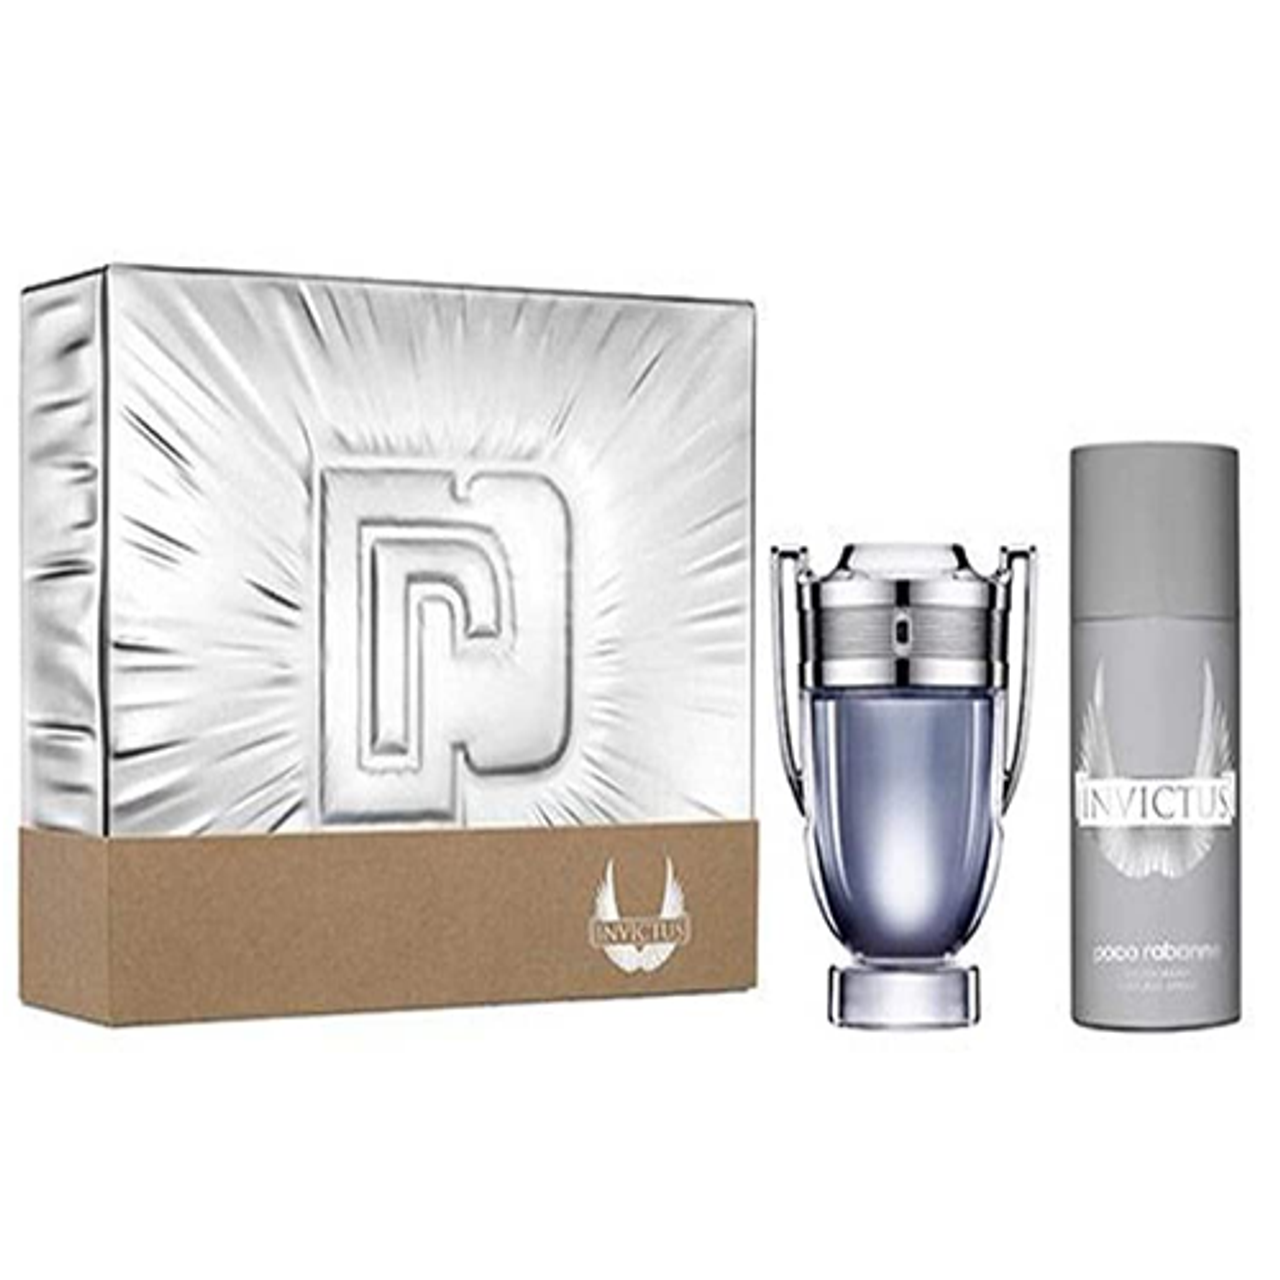 Invictus by Paco Rabanne 2pc Gift Set EDT 3.4 oz + Deodorant Spray for ...